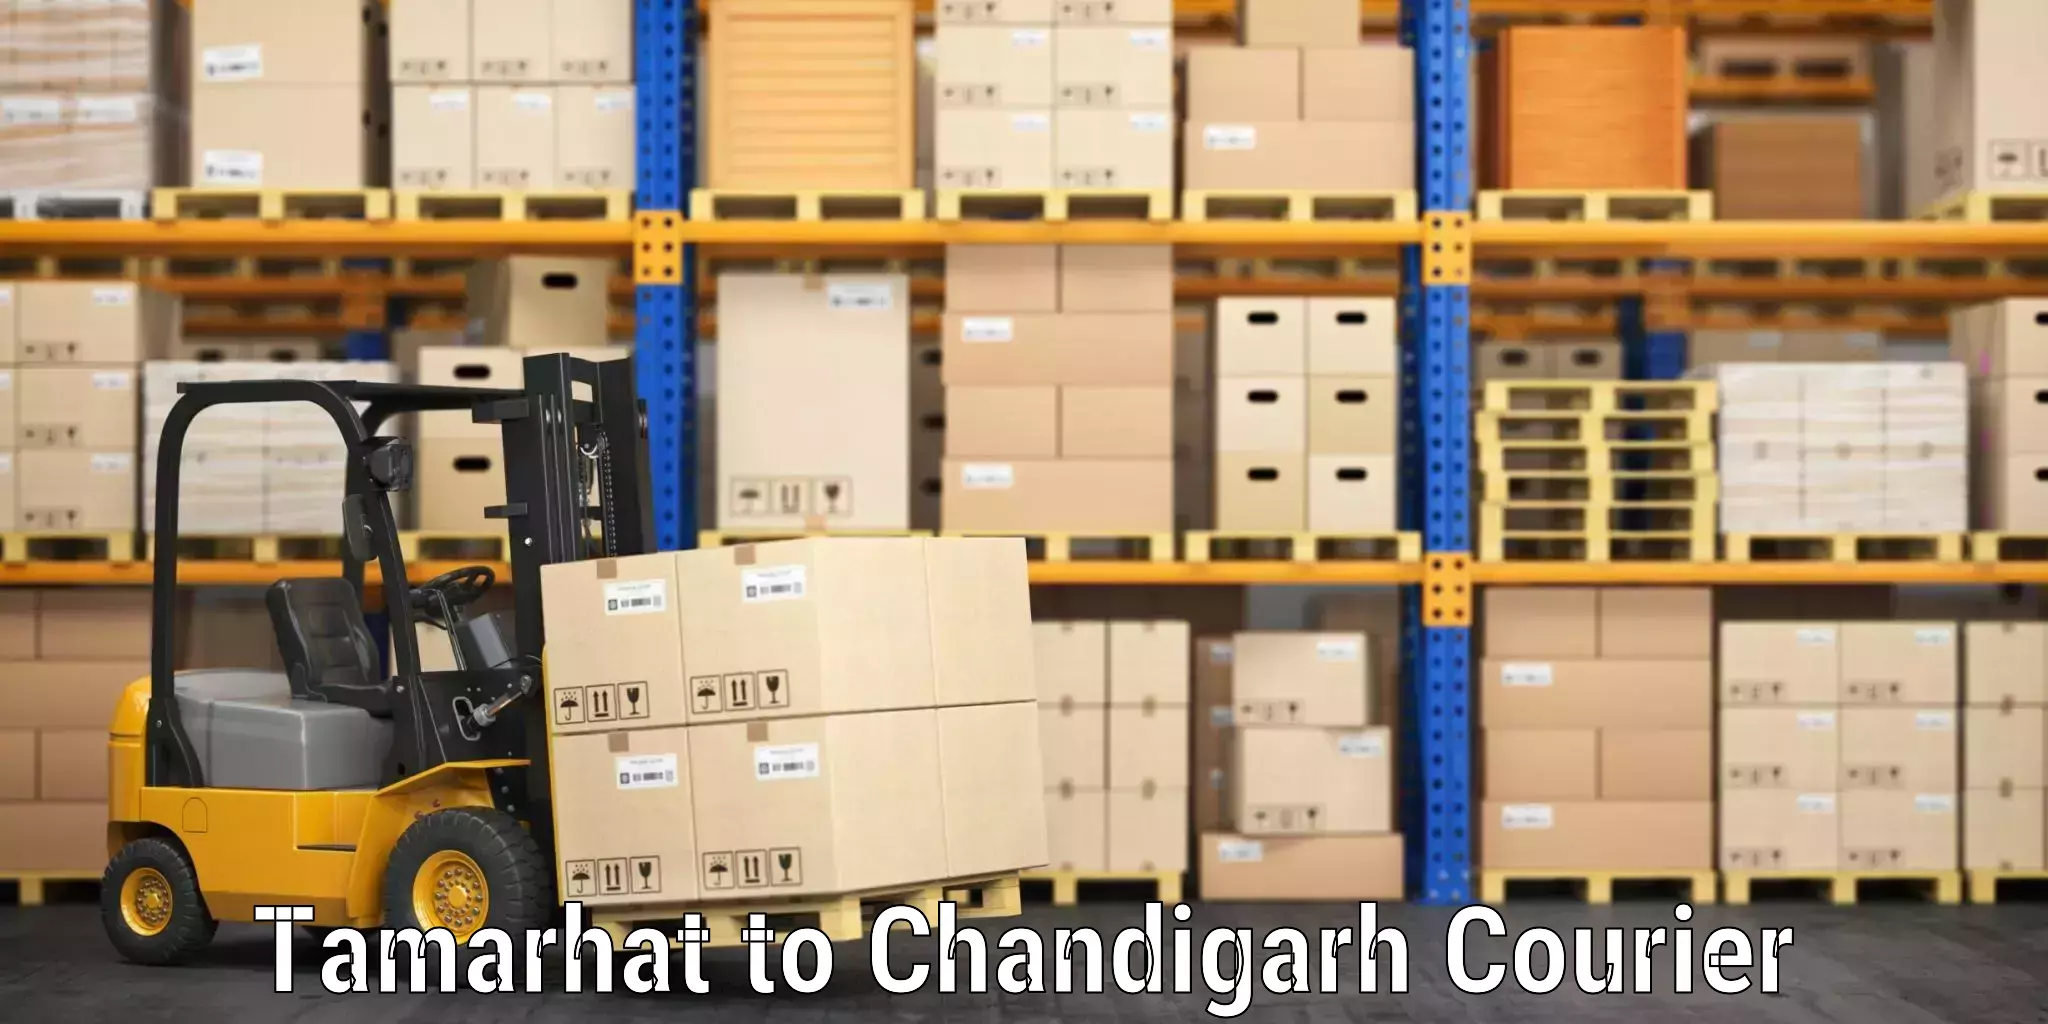 Baggage shipping experience Tamarhat to Chandigarh